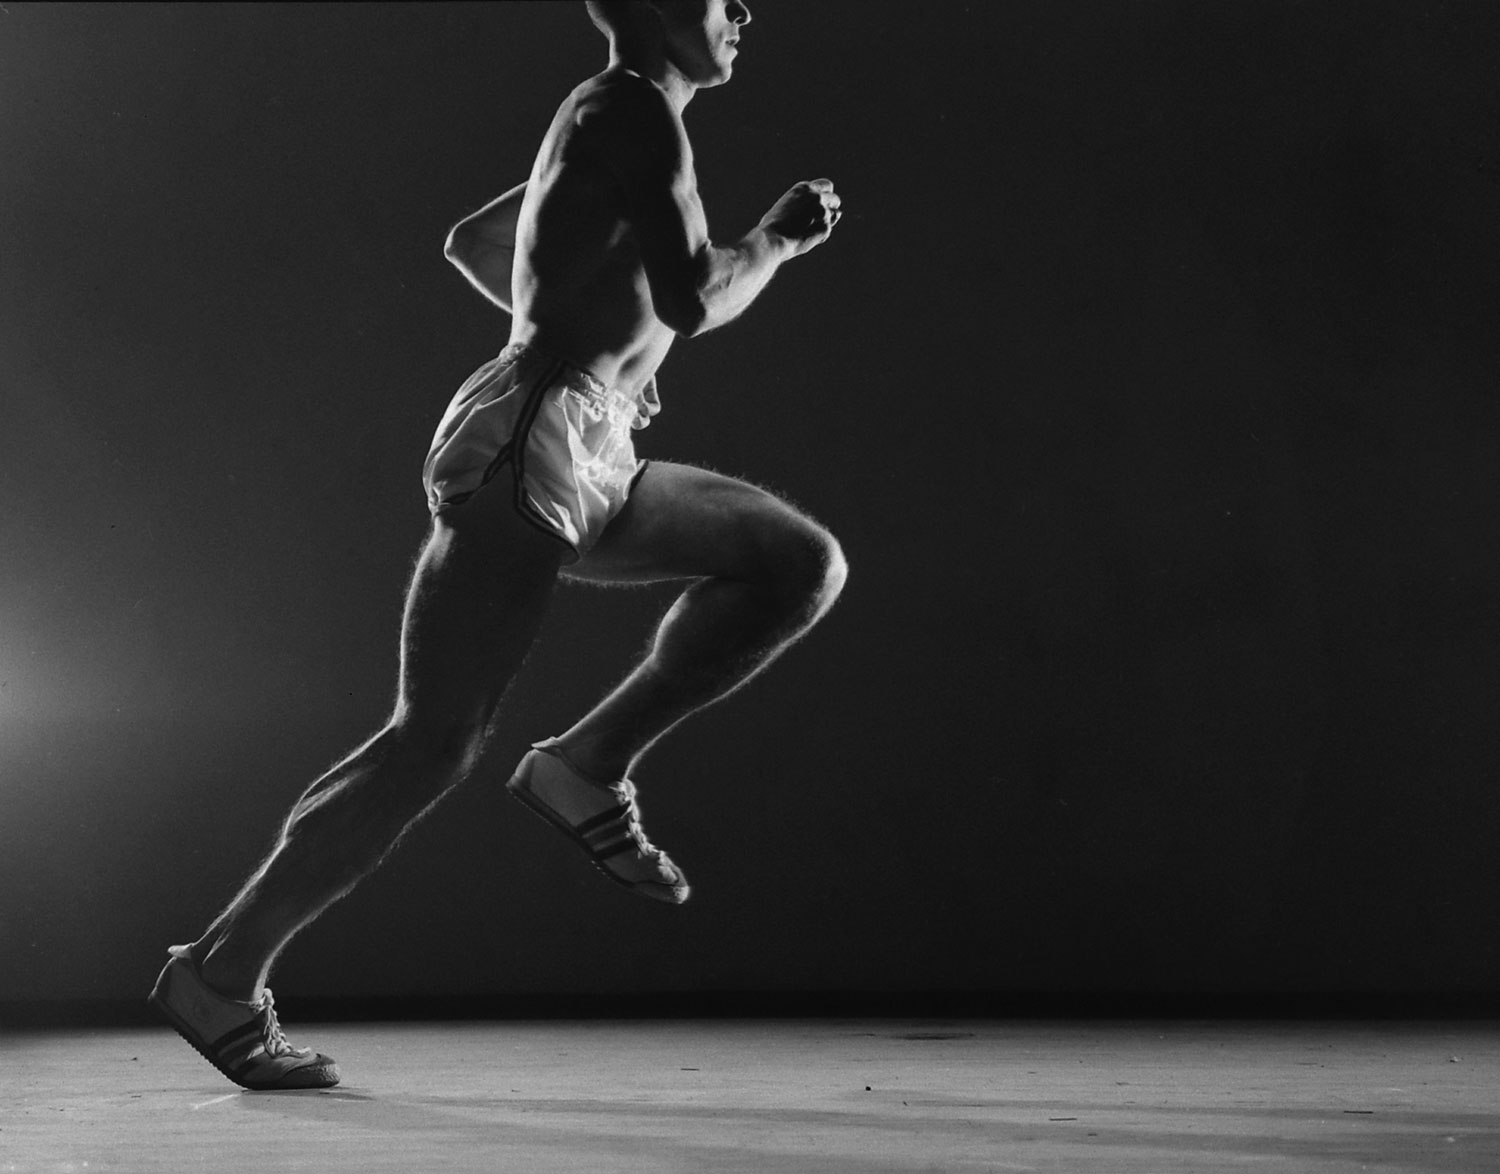 Runner as part of a photographic study of the body's movements, 1962.